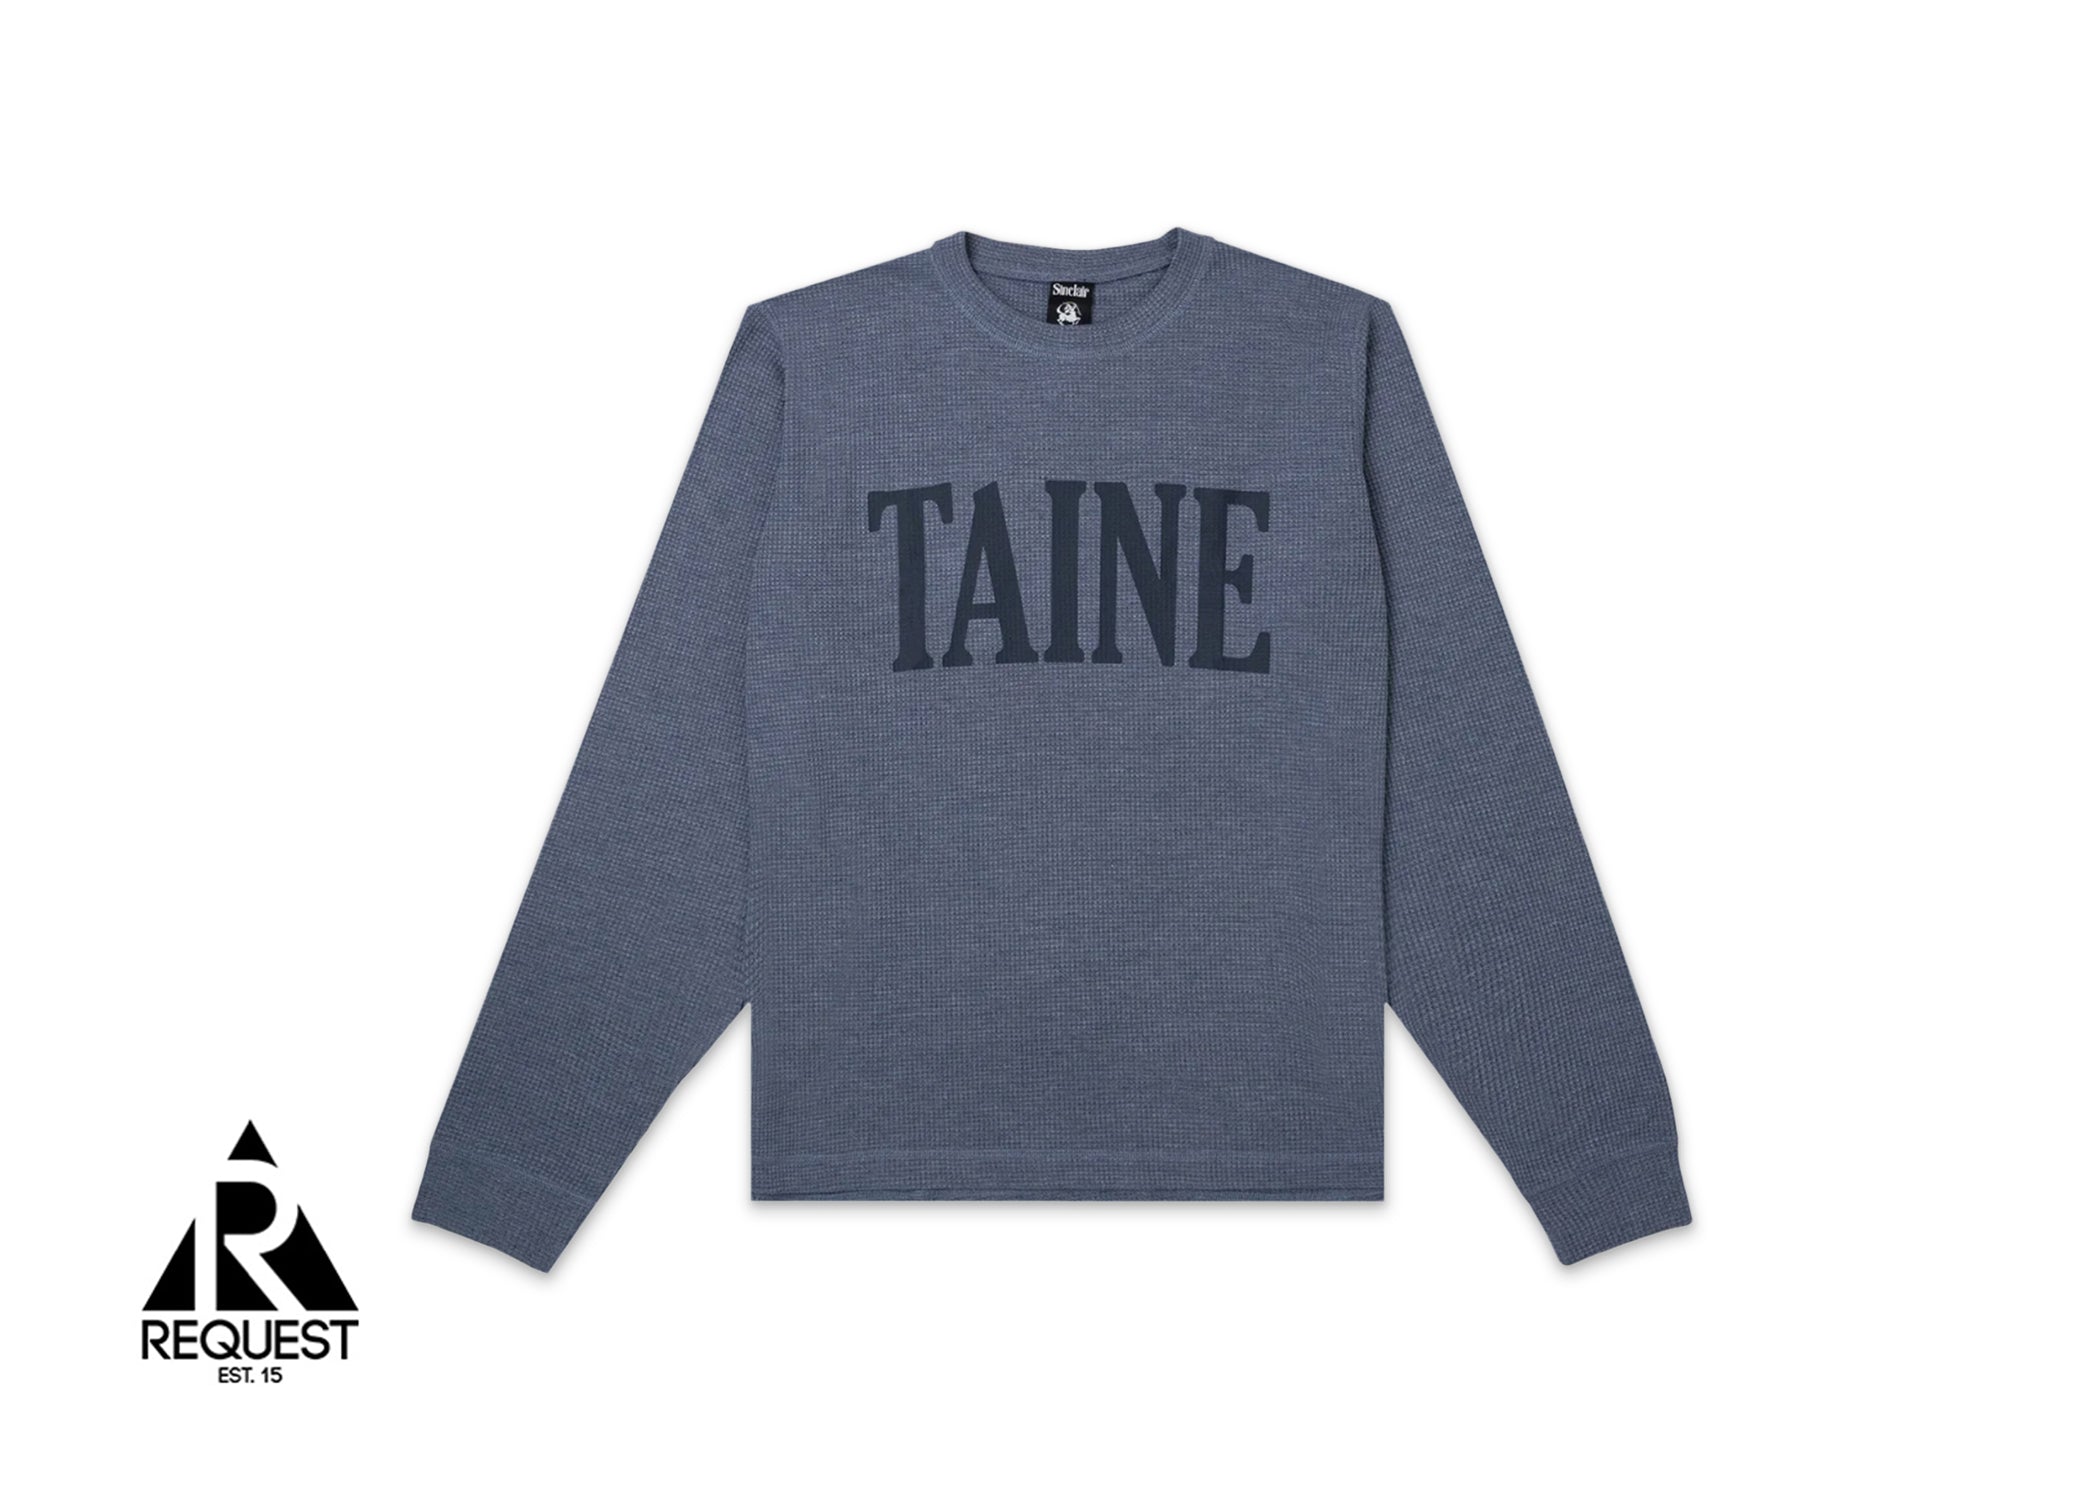 Sinclair Taine Thermal L/S Tee "Blue"